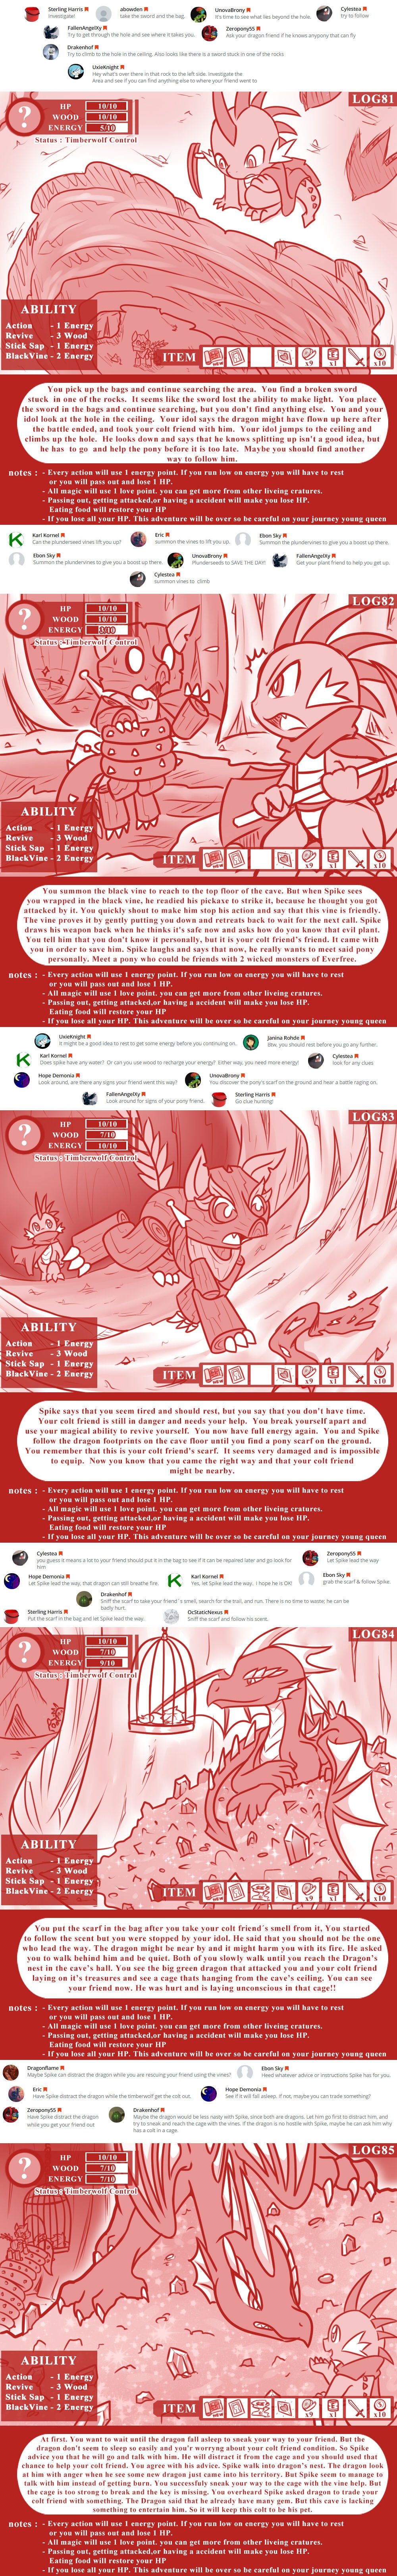 [Vavacung] The Adventure Logs Of Young Queen (My Little Pony Friendship is Magic) [Updated] [Ongoing] 19